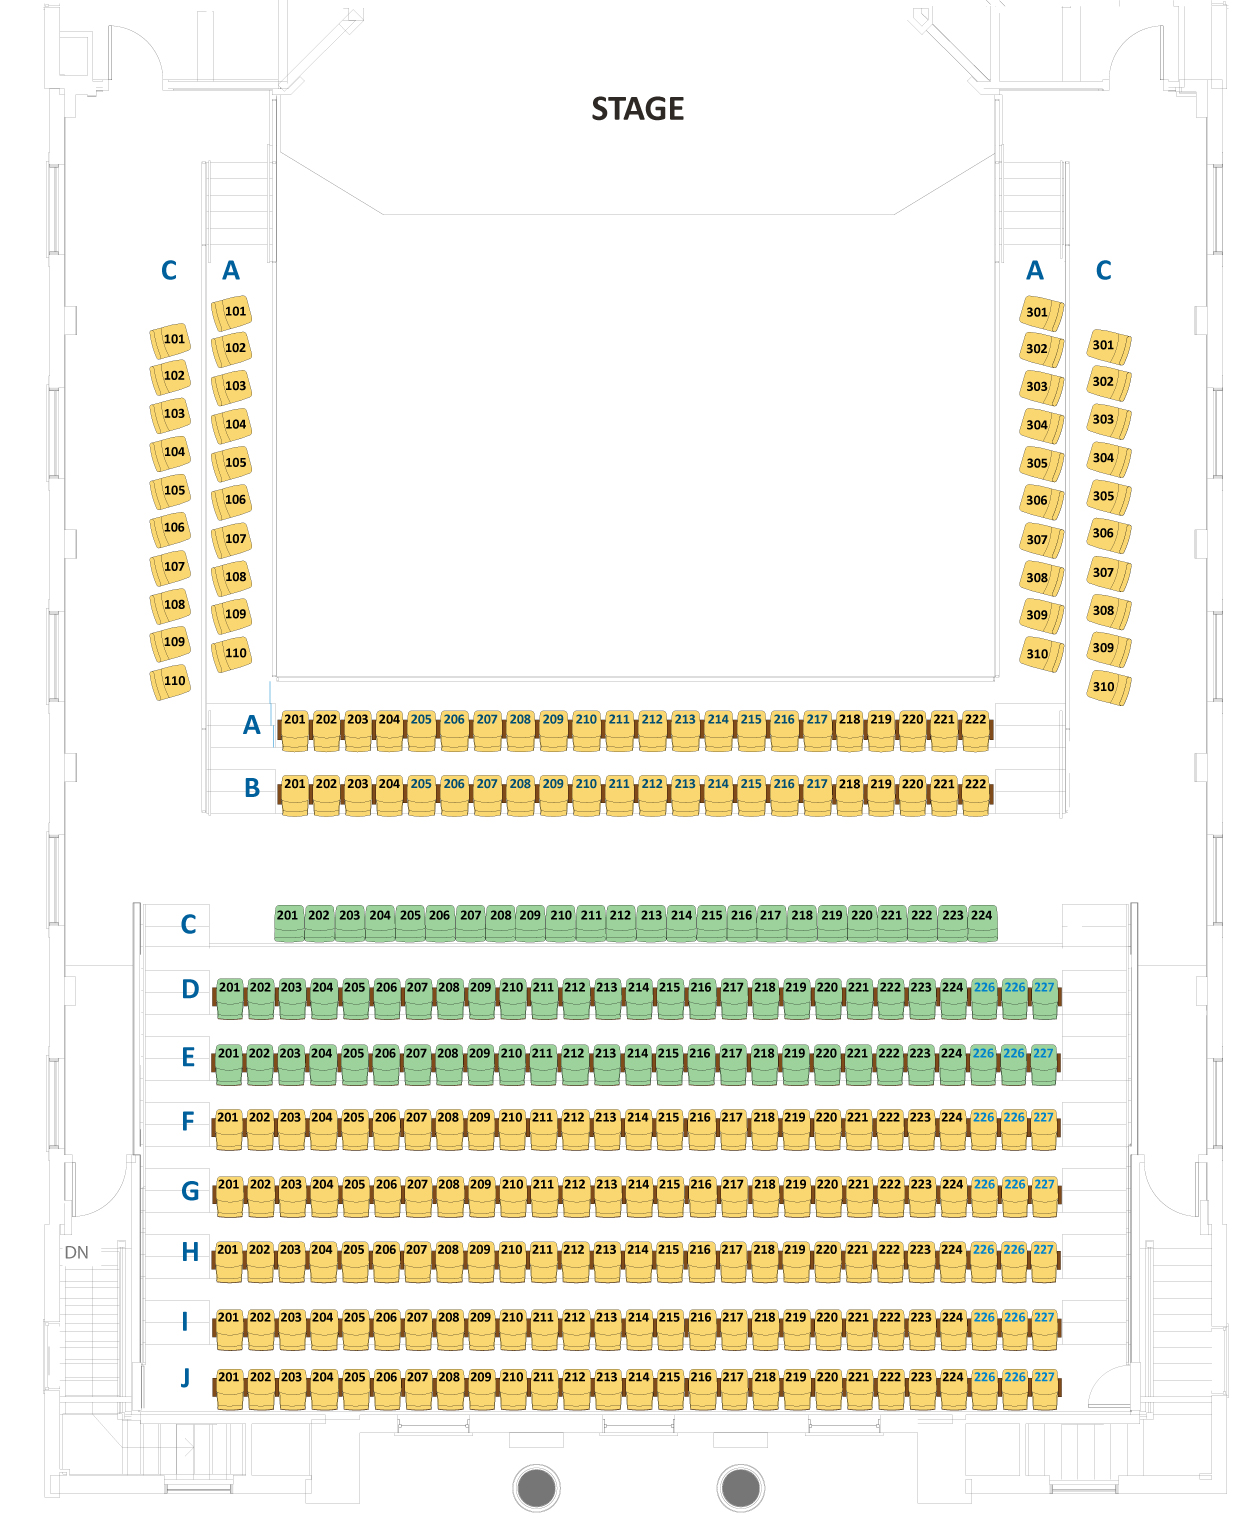 The Shedd Institute Seating Chart